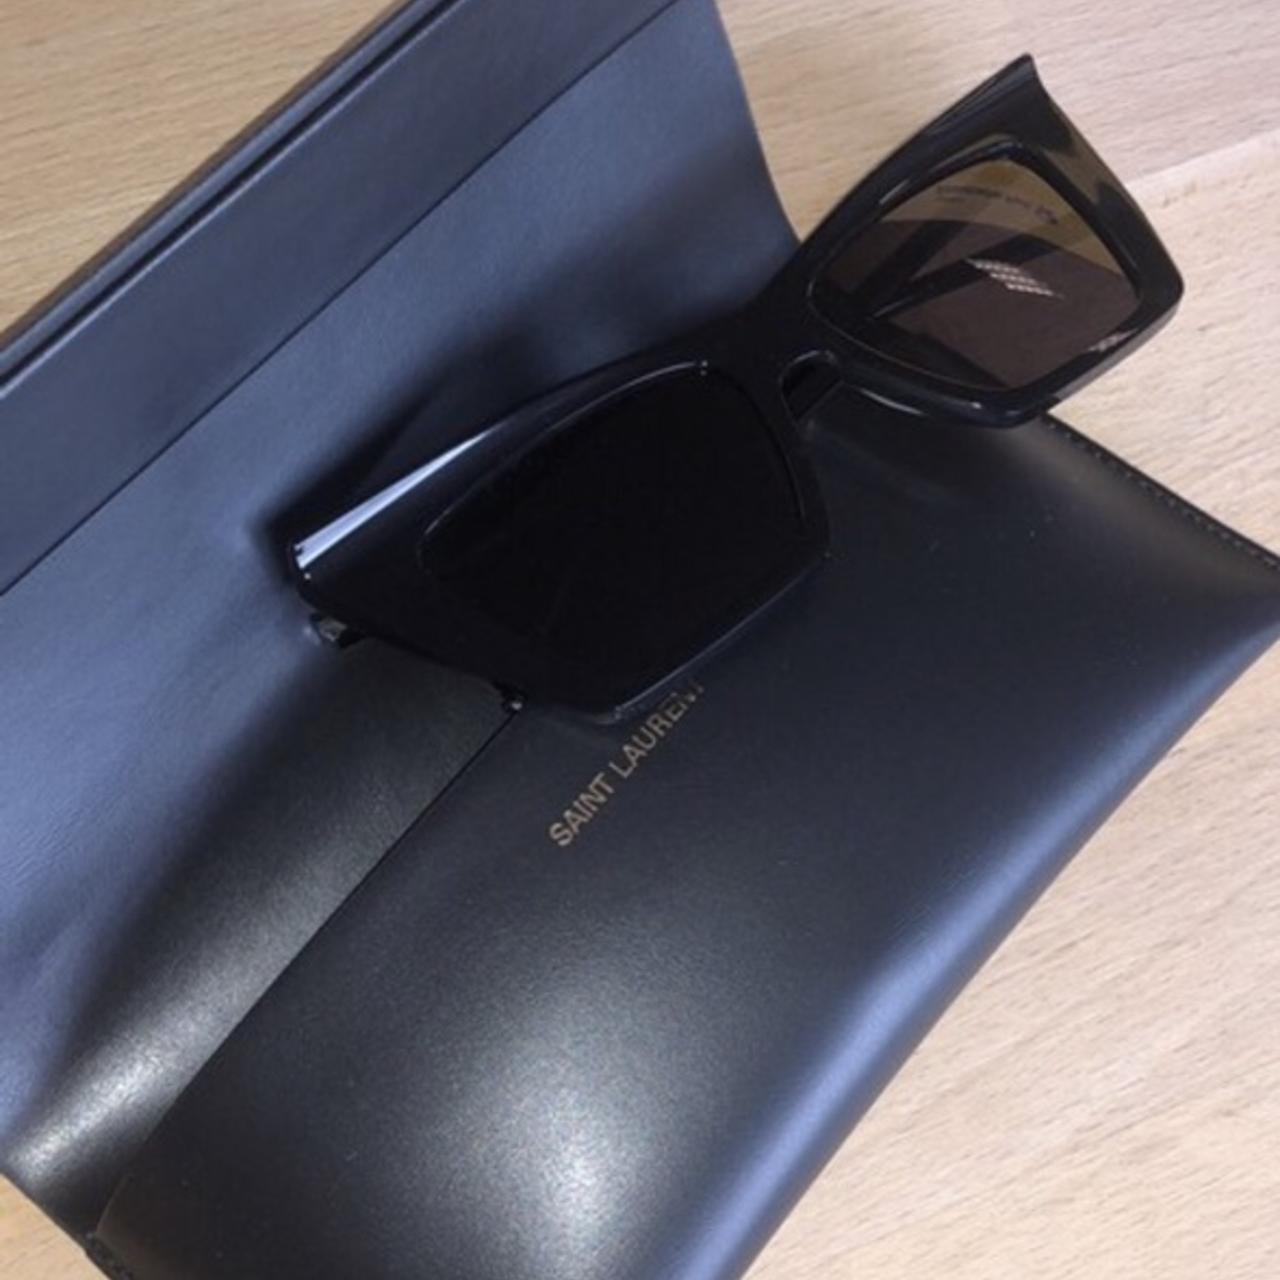 YSL Cat eye sunglasses Brand new comes with box, - Depop